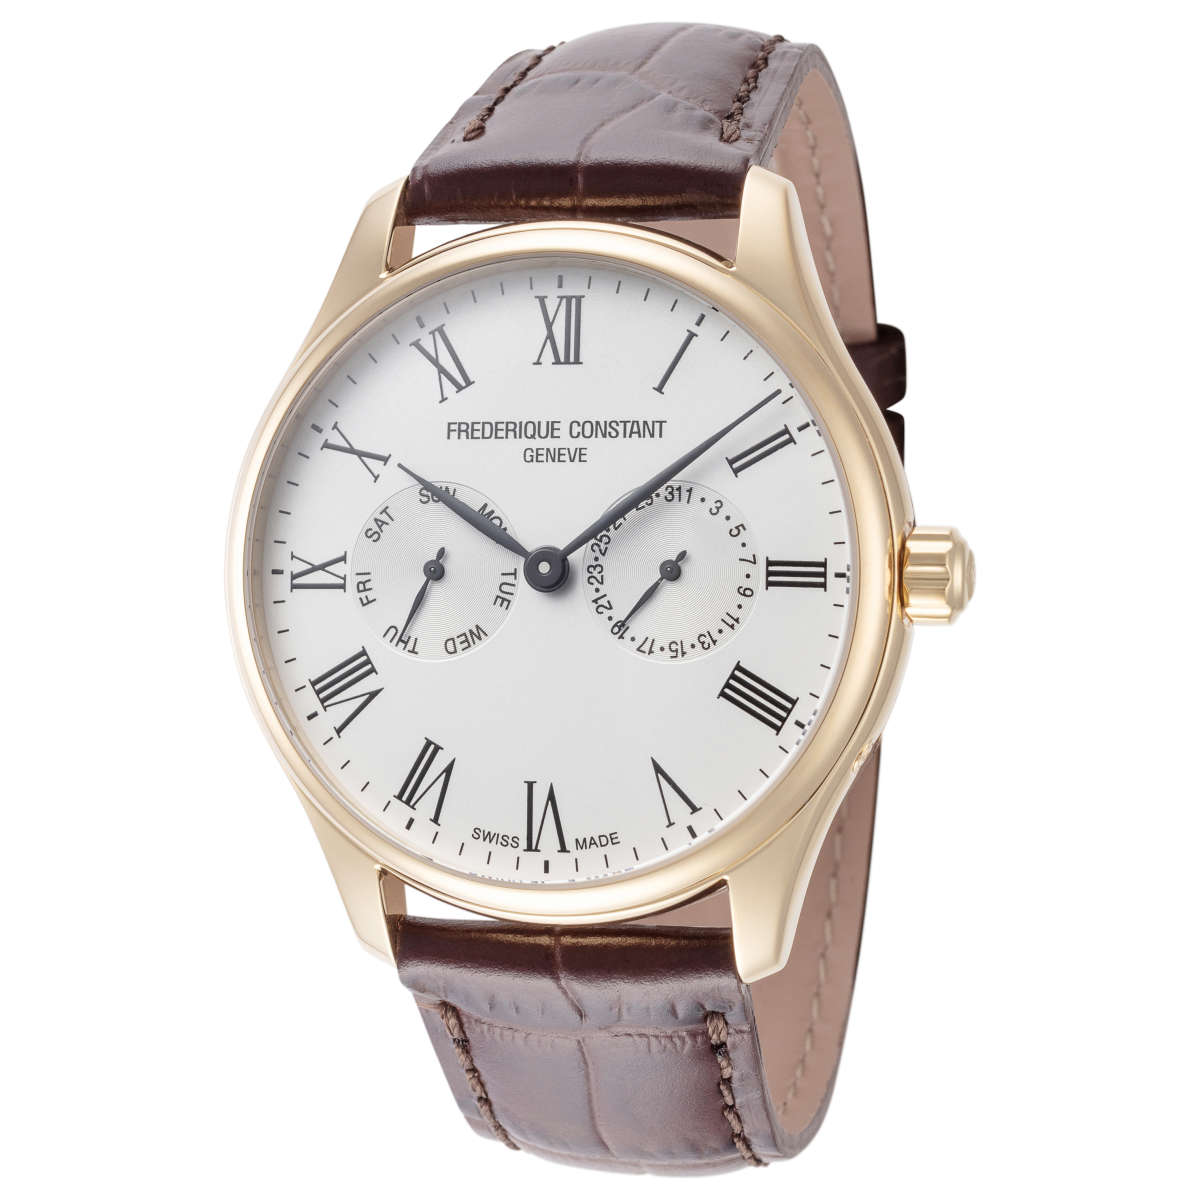 Frederique Constant Automatic Watches: Classics Date And Day or Persuasion $379 each + free s/h